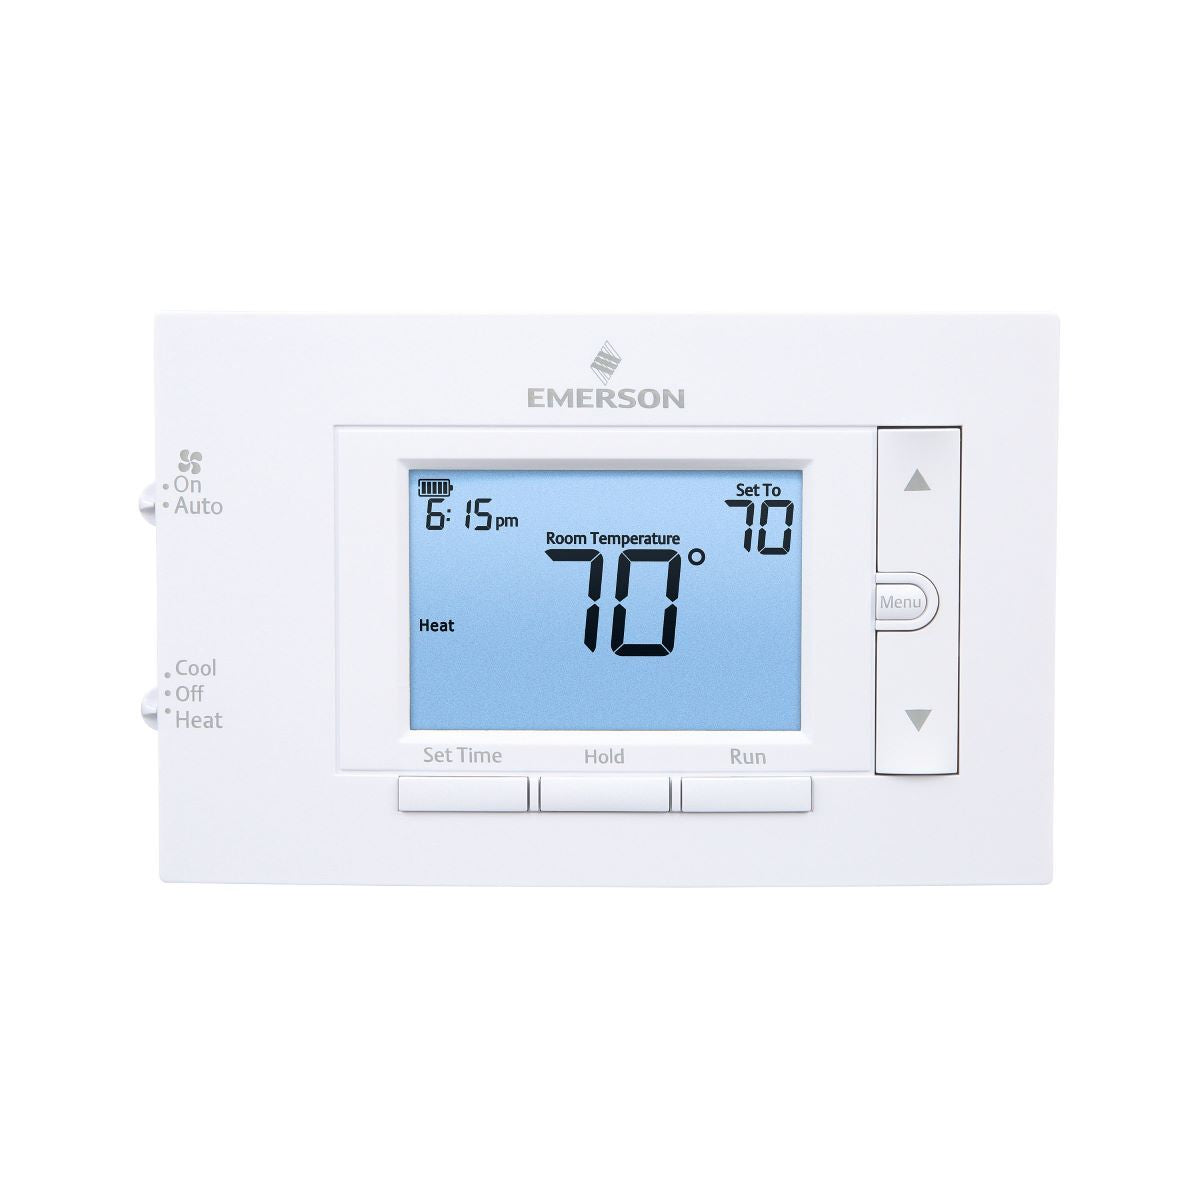 1F83C-11NP-4.5" Digital Display Non-Programmable Thermostat Conventional Single Stage 1H/1C